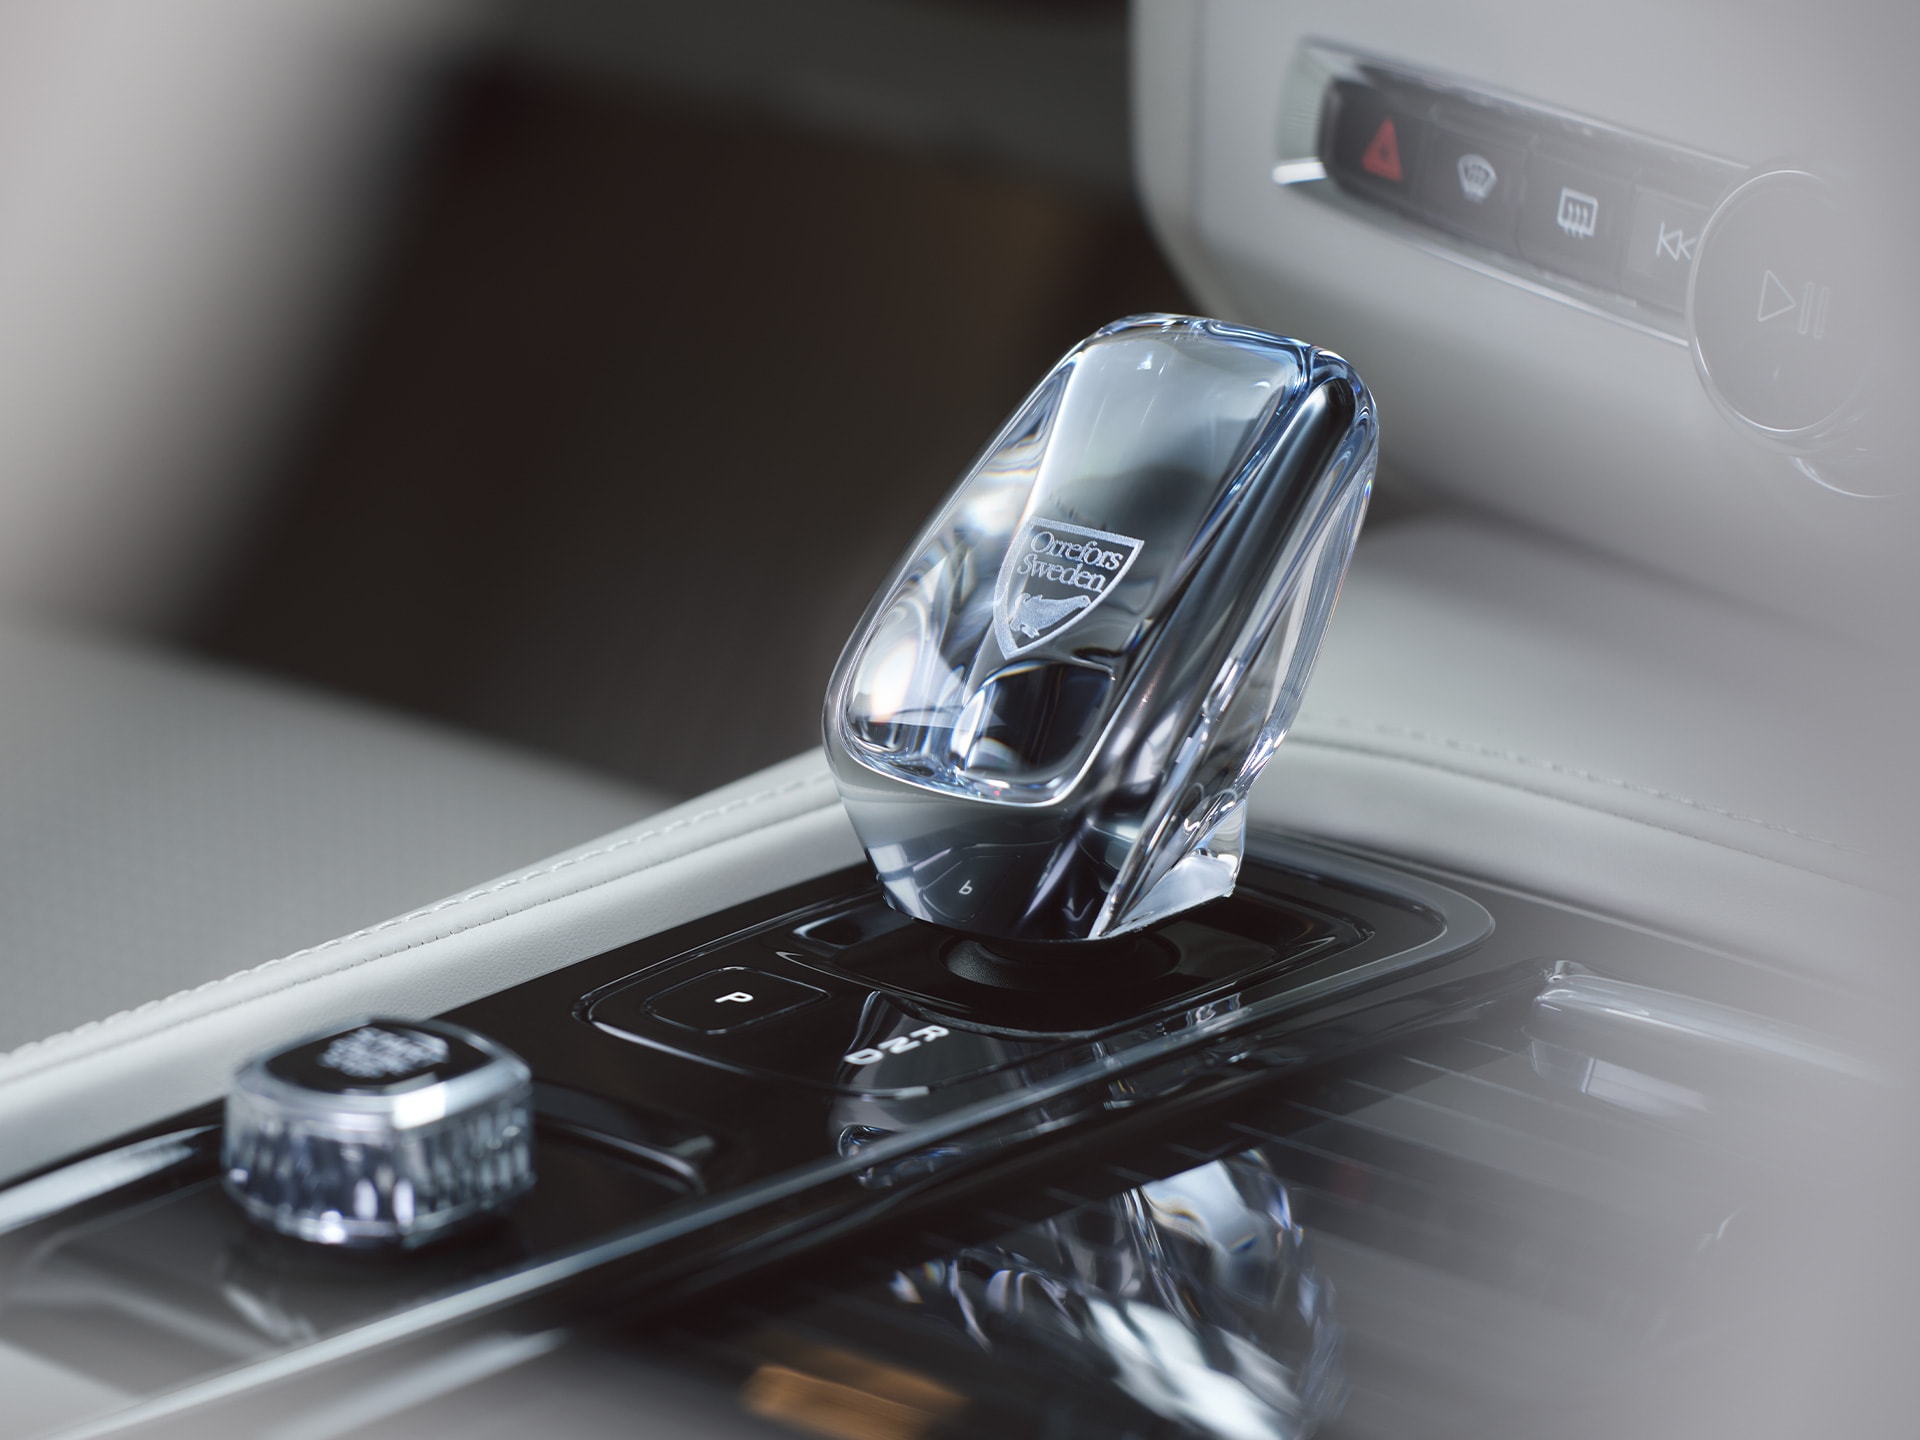 A crystal gear shifter in genuine Swedish crystal from Orrefors in a Volvo S90 sedan.